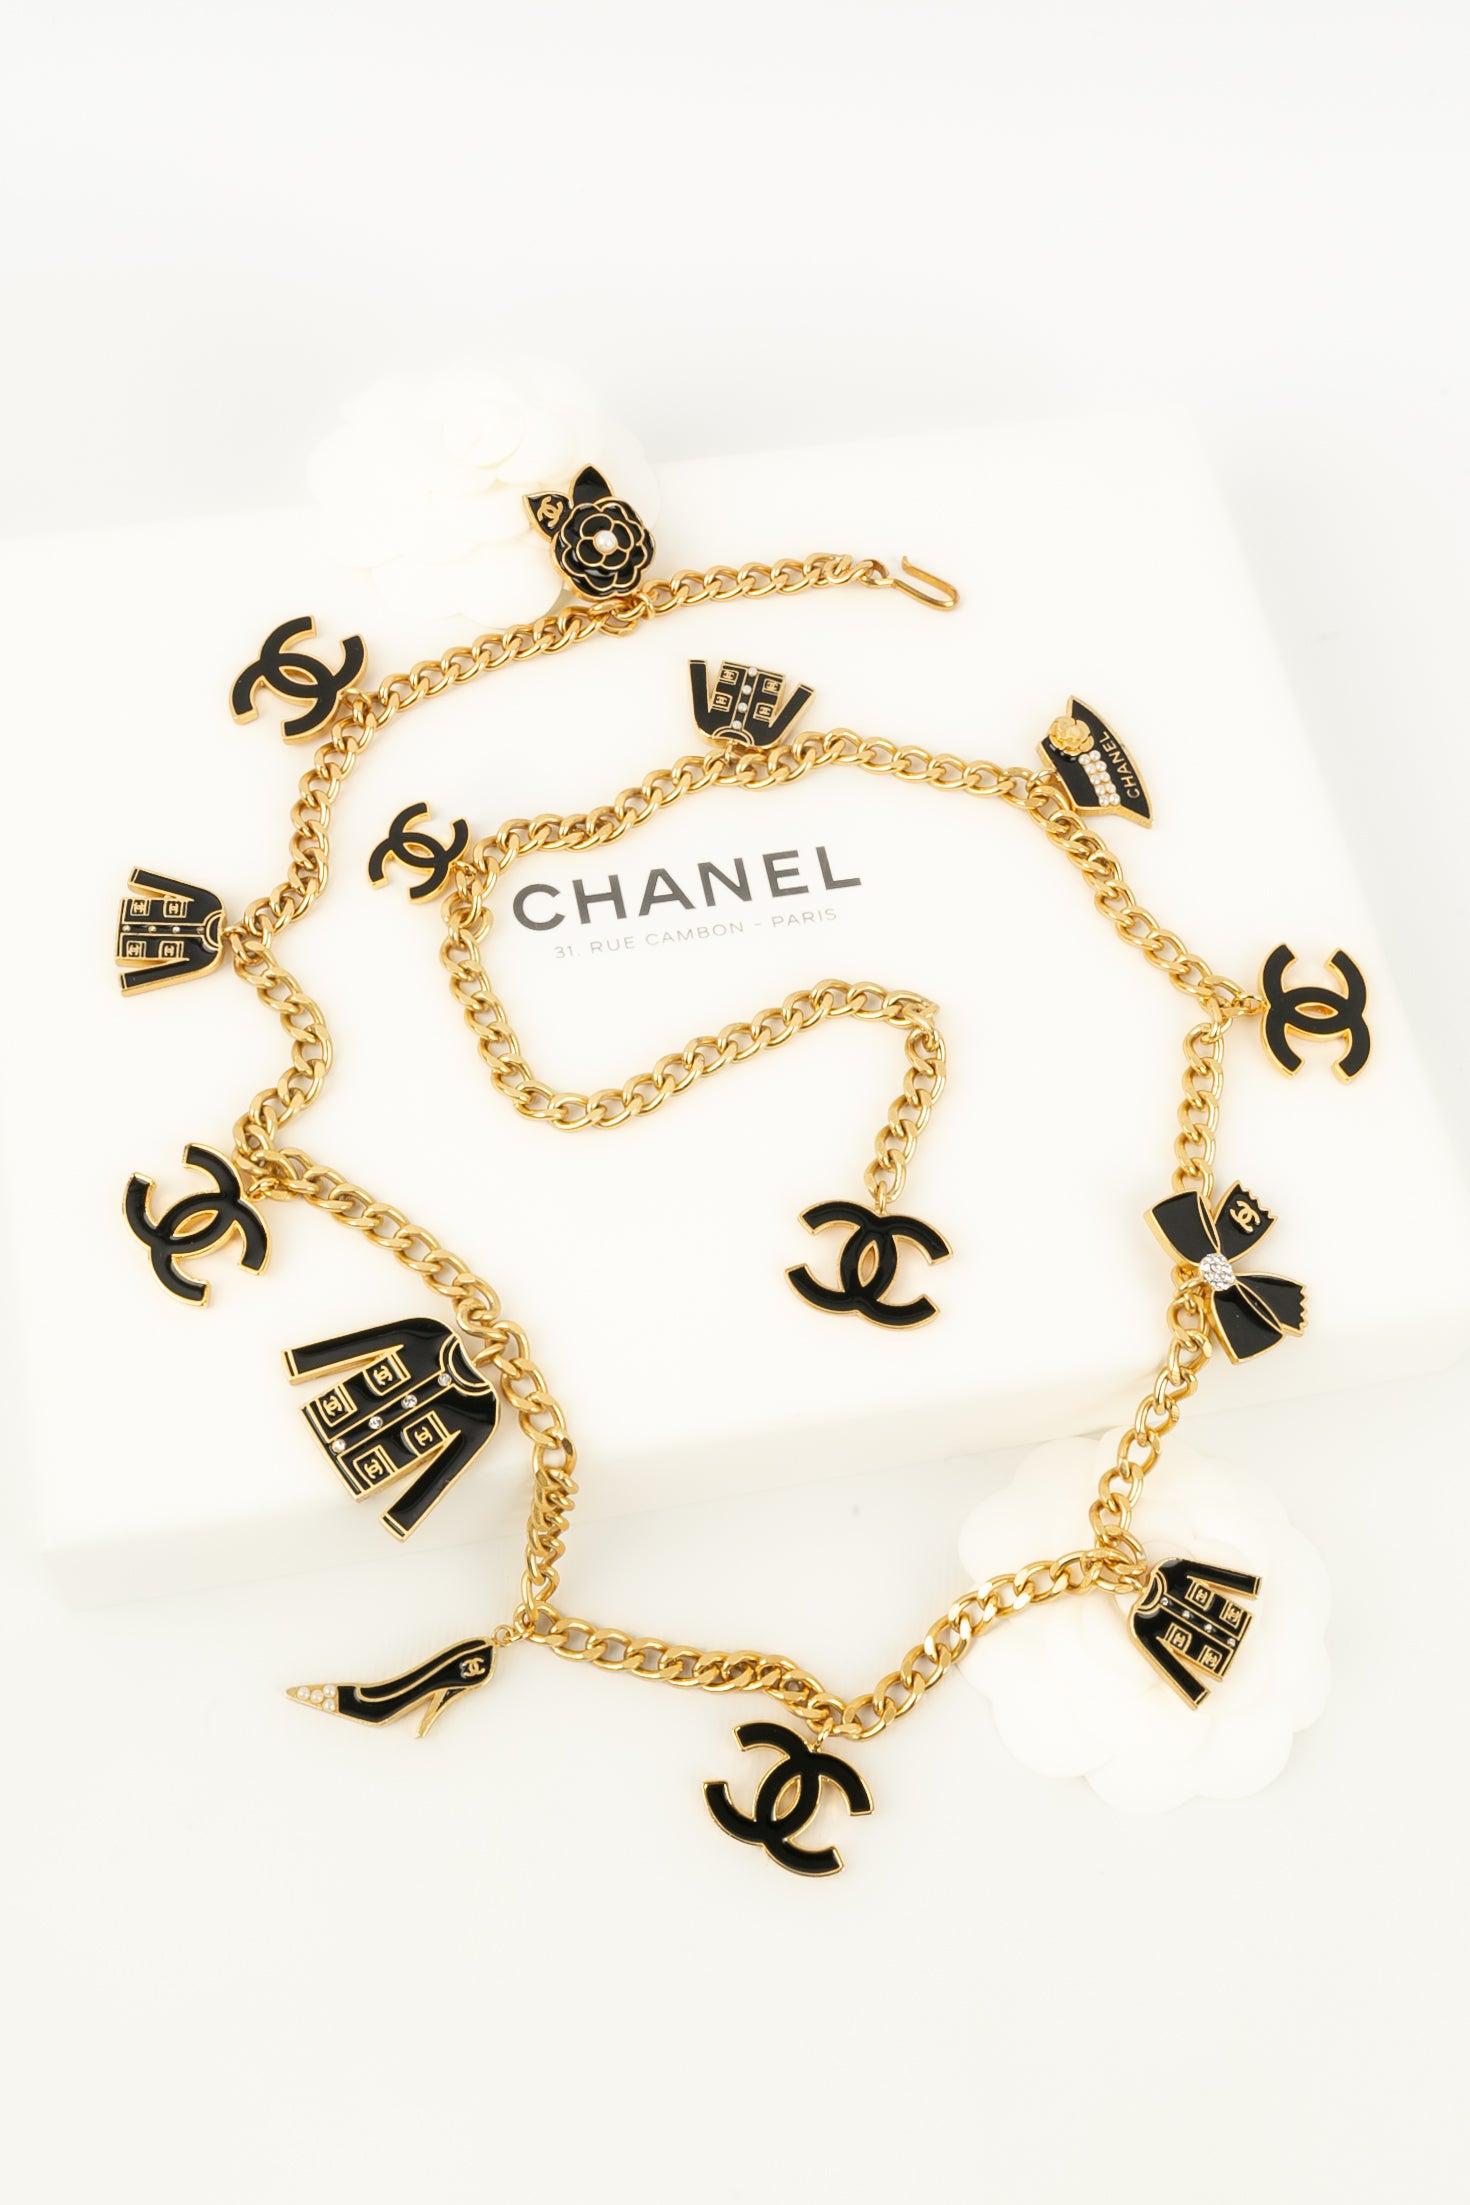 Chanel Long Necklace in Gold-Plated Metal and Charms, 2002 For Sale 7